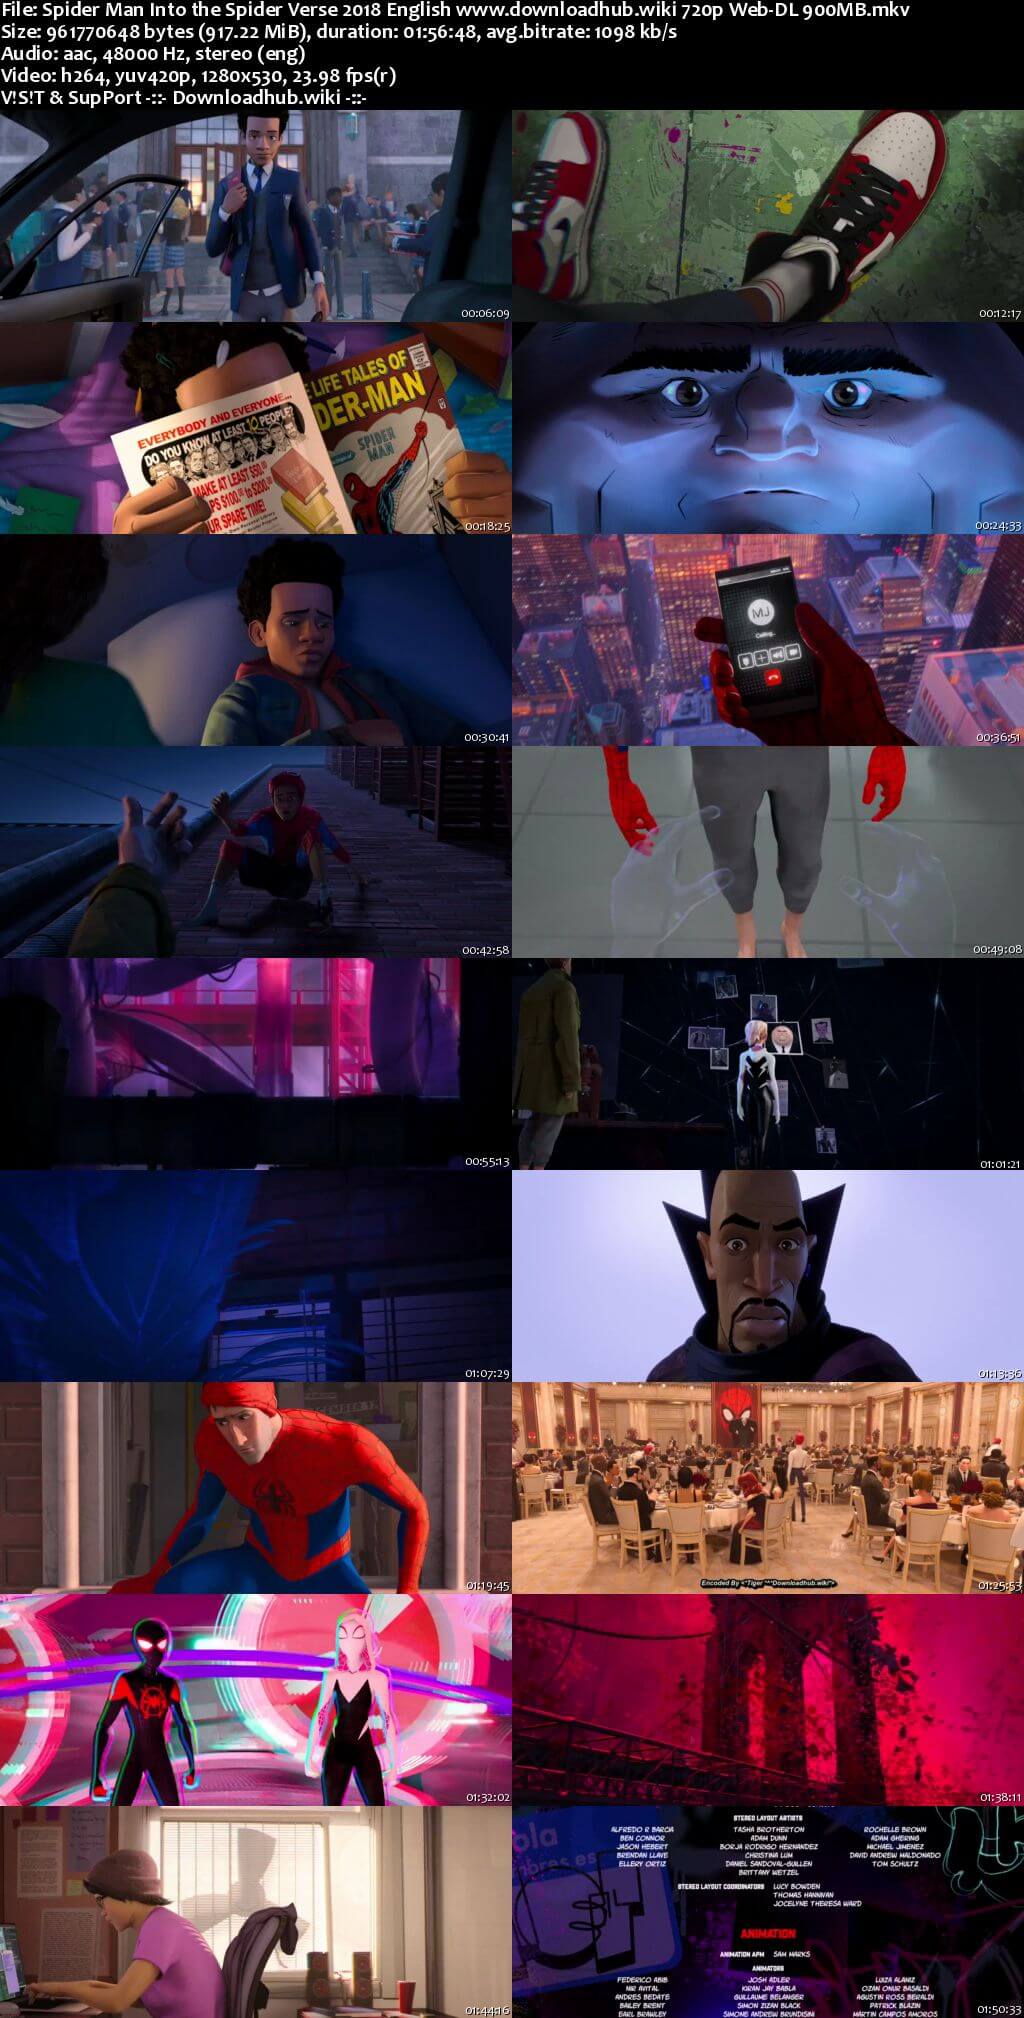 Spider Man Into the Spider Verse 2018 English 720p Web-DL 900MB